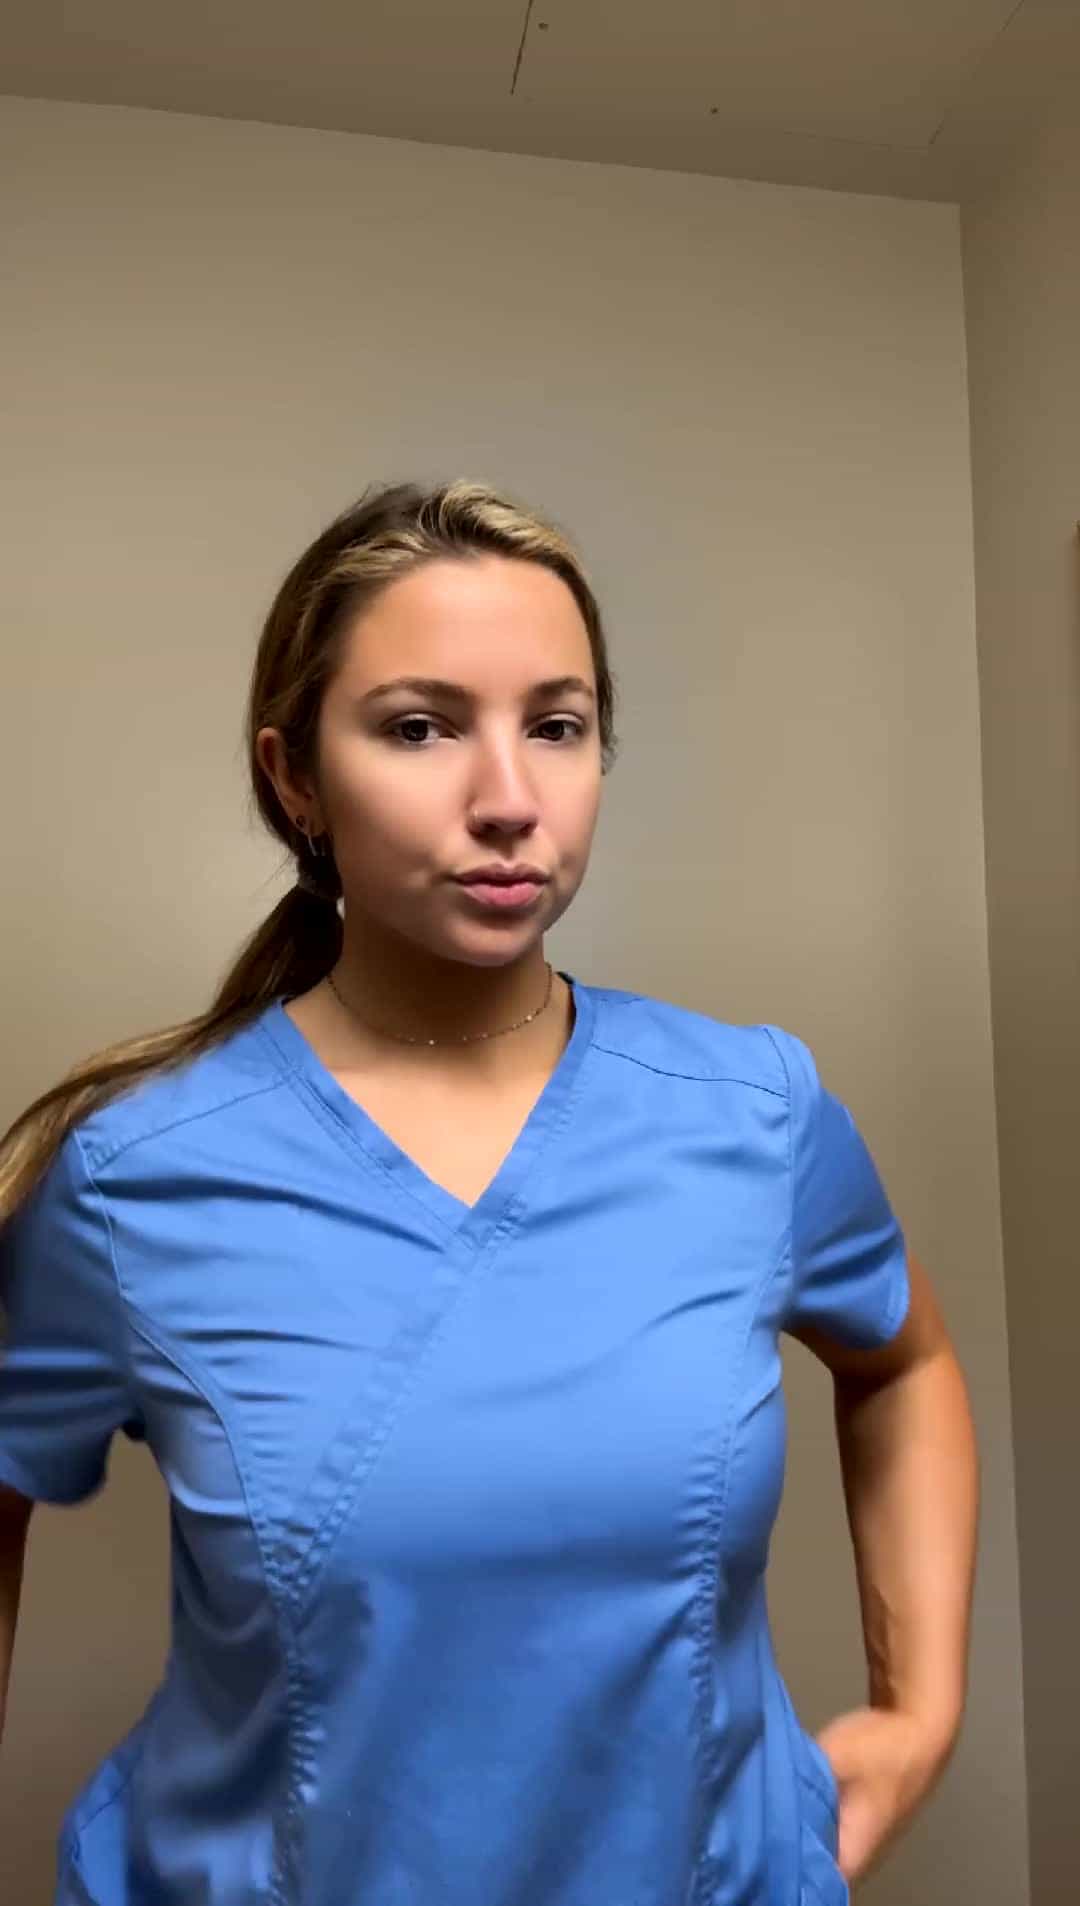 The real healthcare heroes show their tits at work hehe🥵